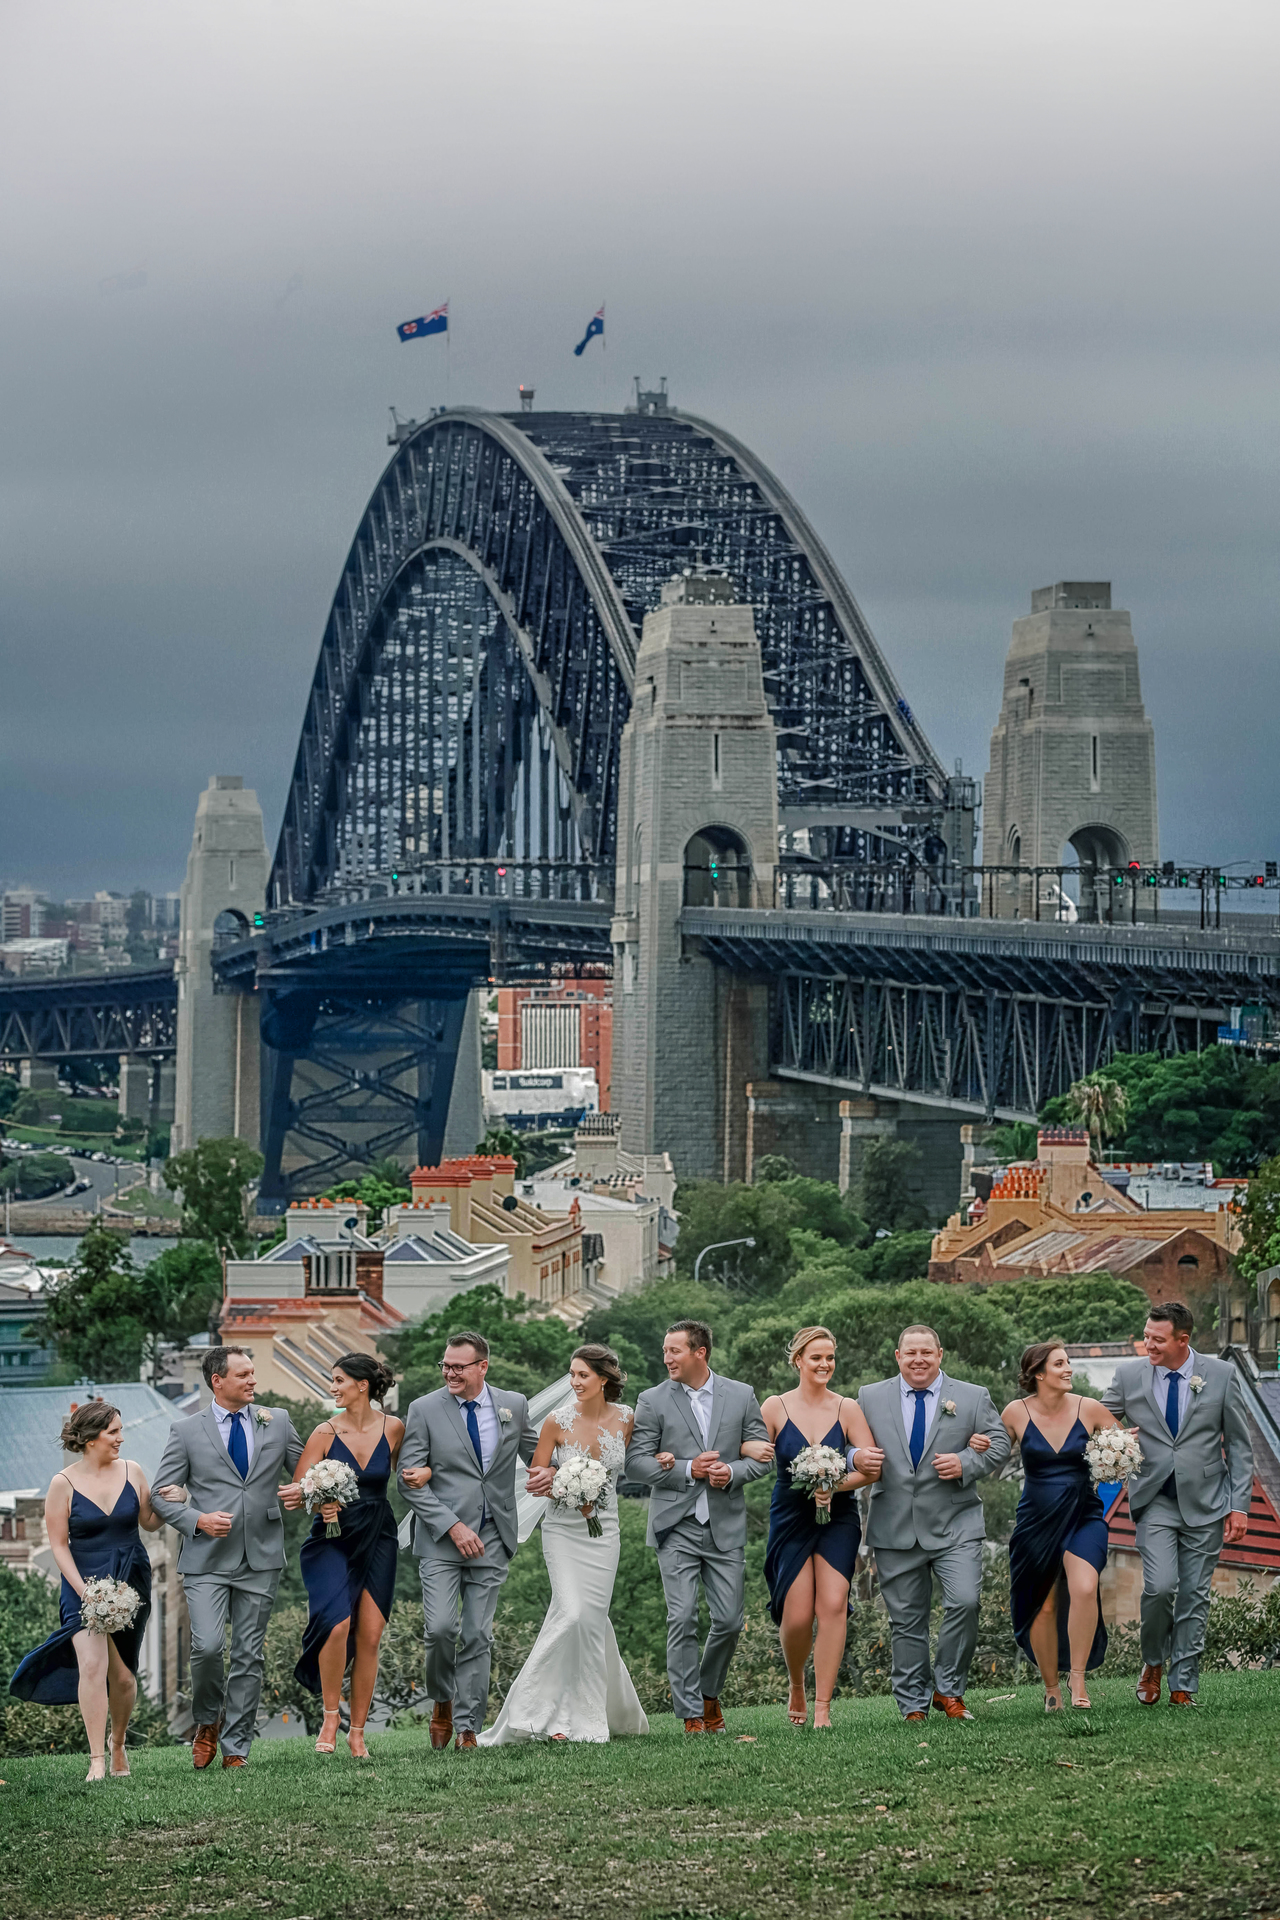 Beautiful shot of the entire wedding party in front of the Sydney harbour bridge